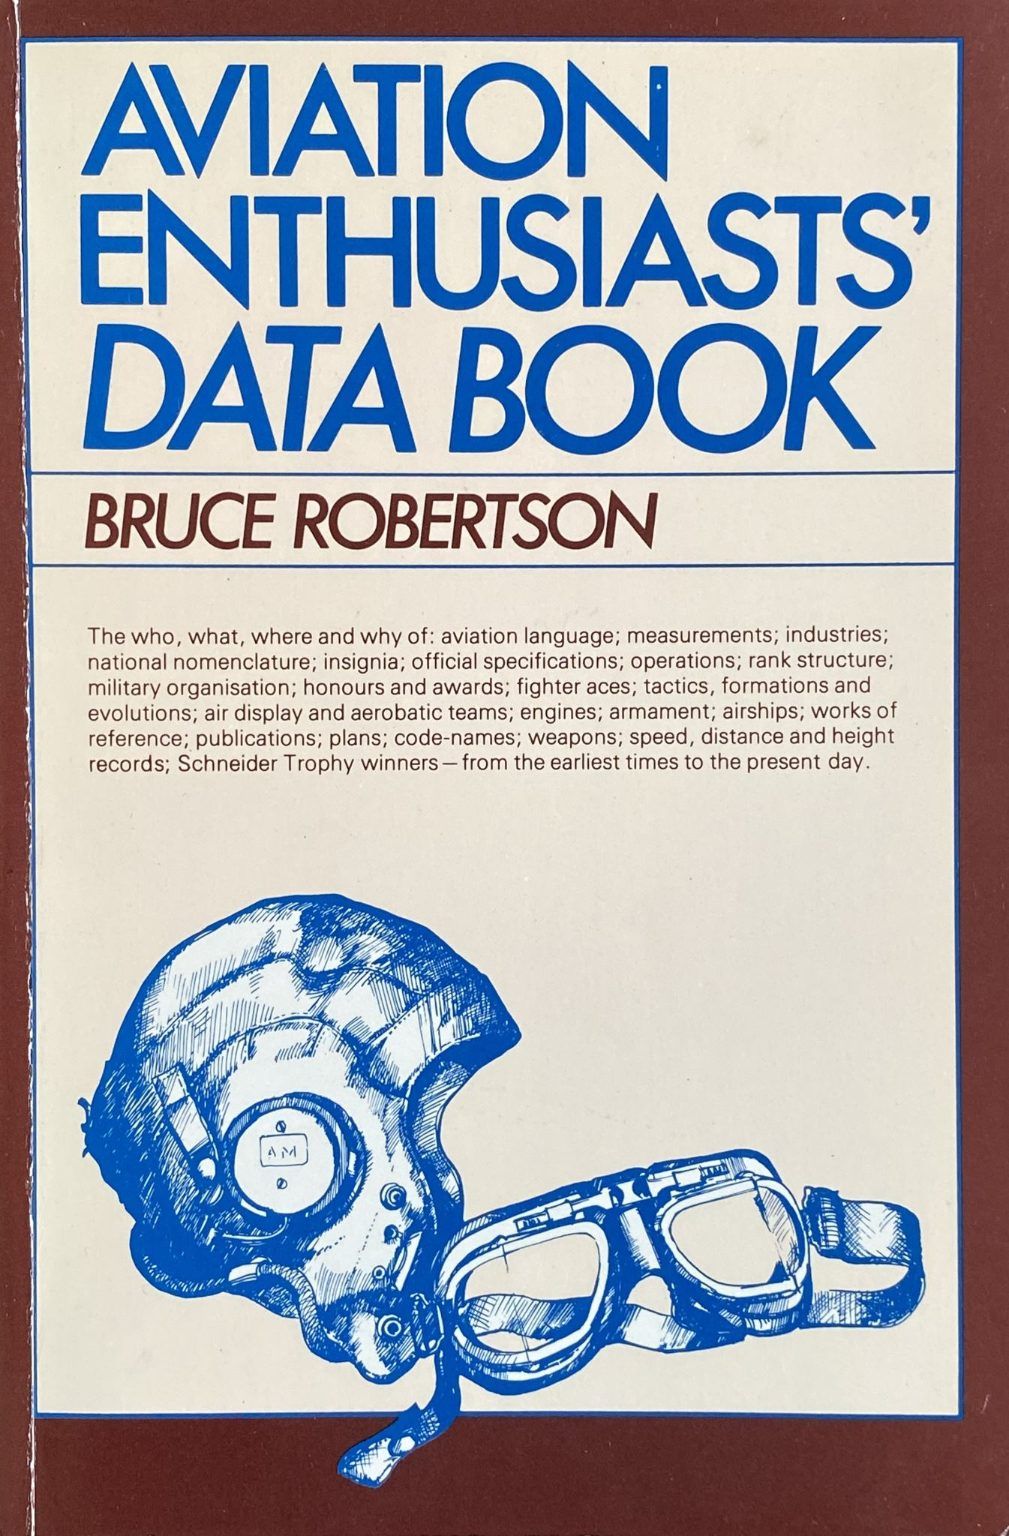 AVIATION ENTHUSIASTS' DATA BOOK